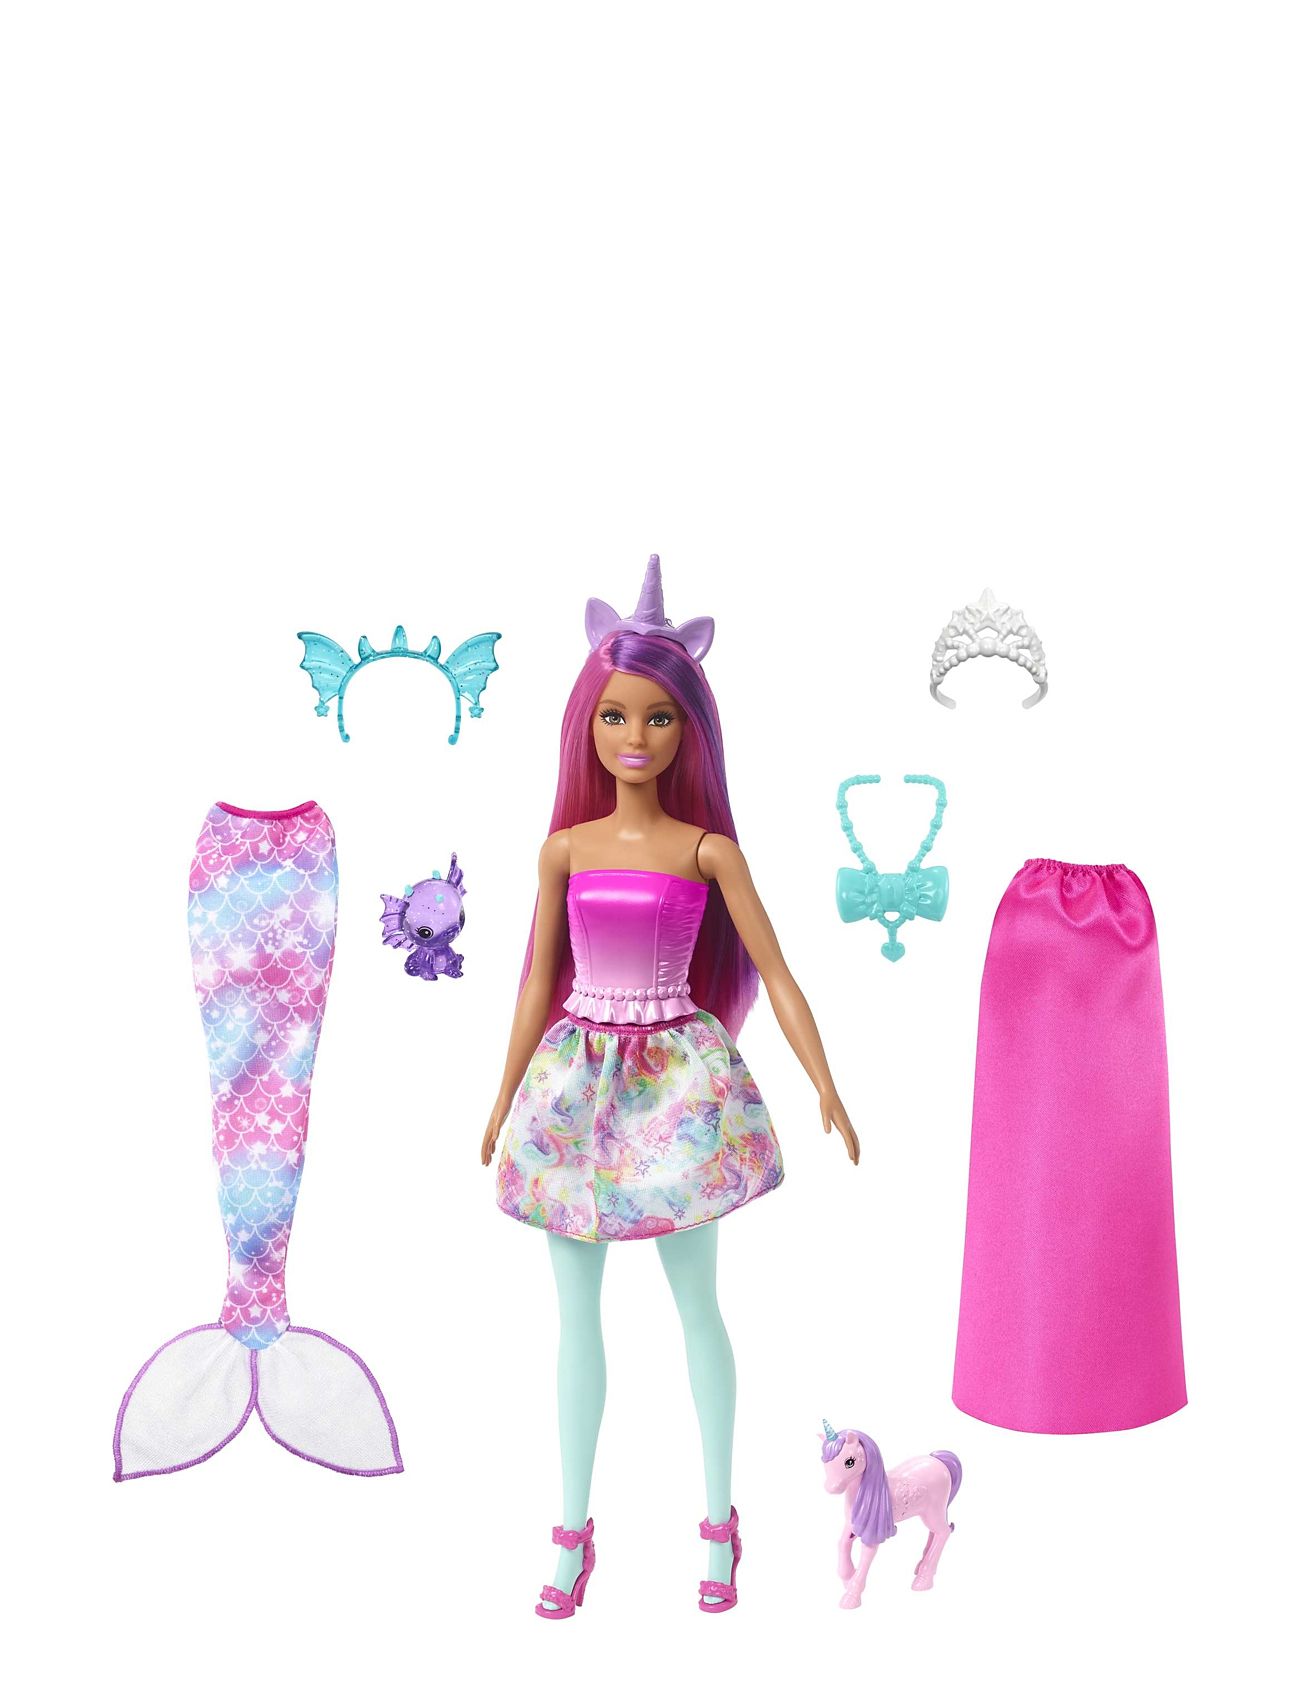 Dreamtopia Doll And Accessories Toys Dolls & Accessories Dolls Multi/patterned Barbie